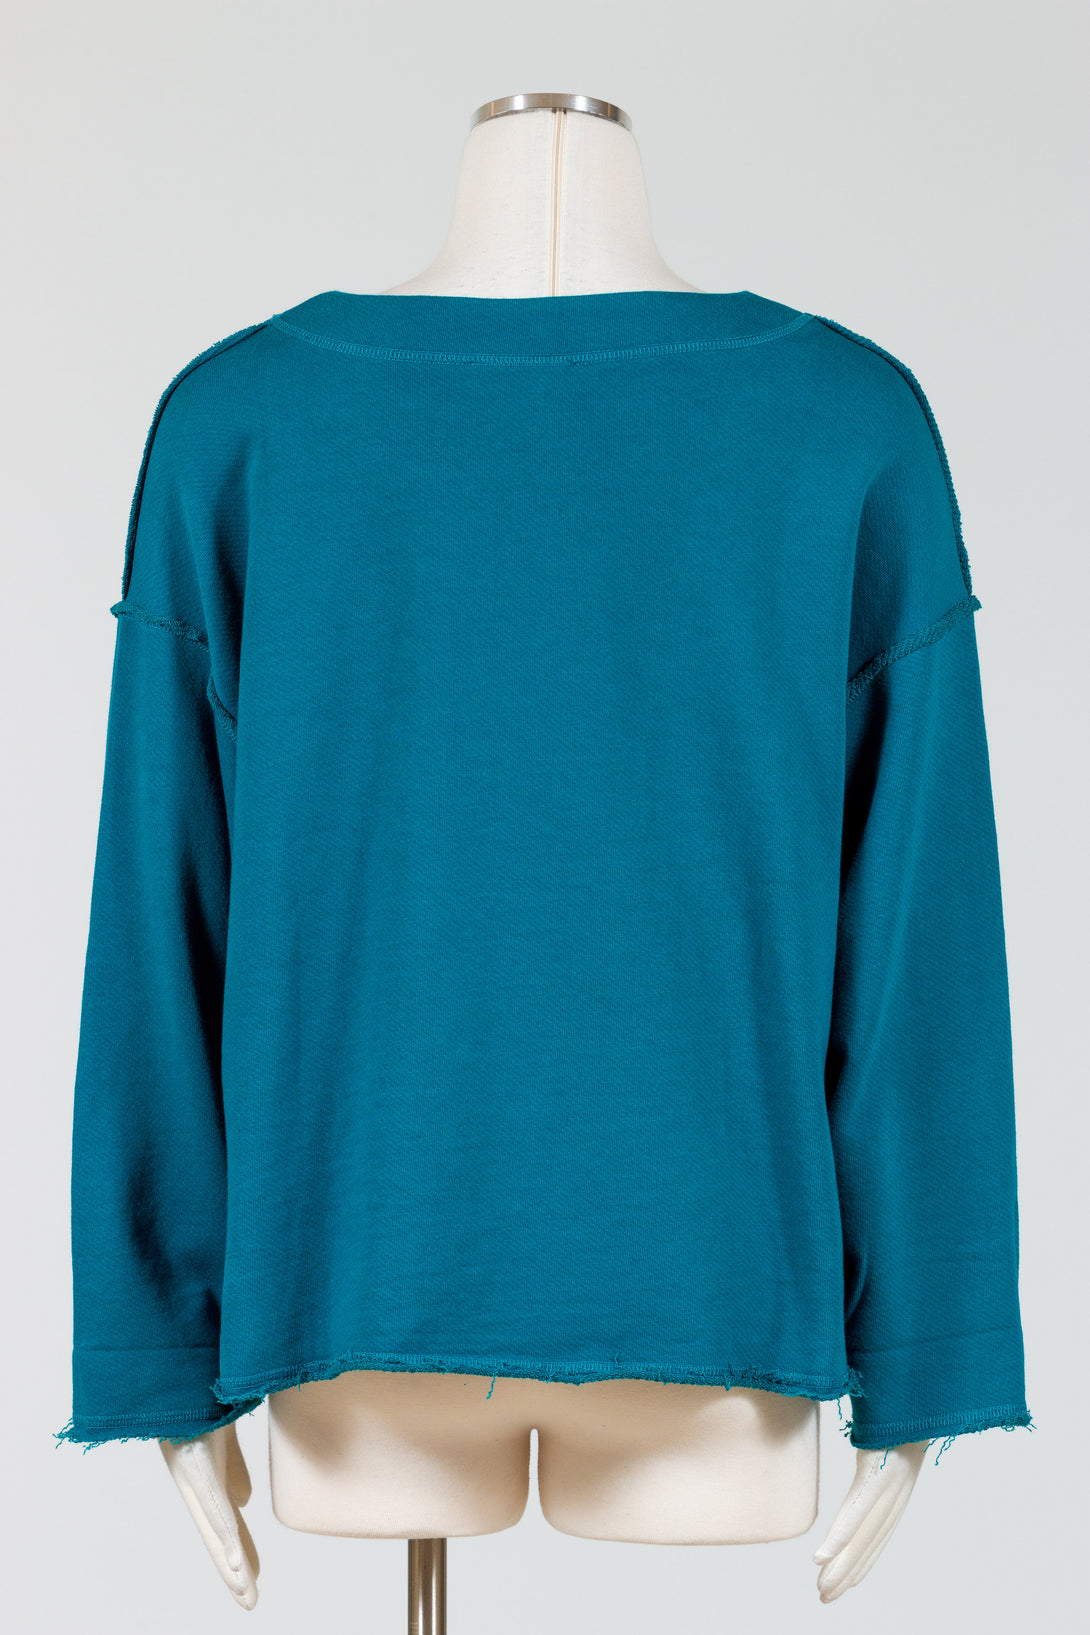 Liv-Habitat-Ease-Pullover-FrenchTerry-Jewel-Teal